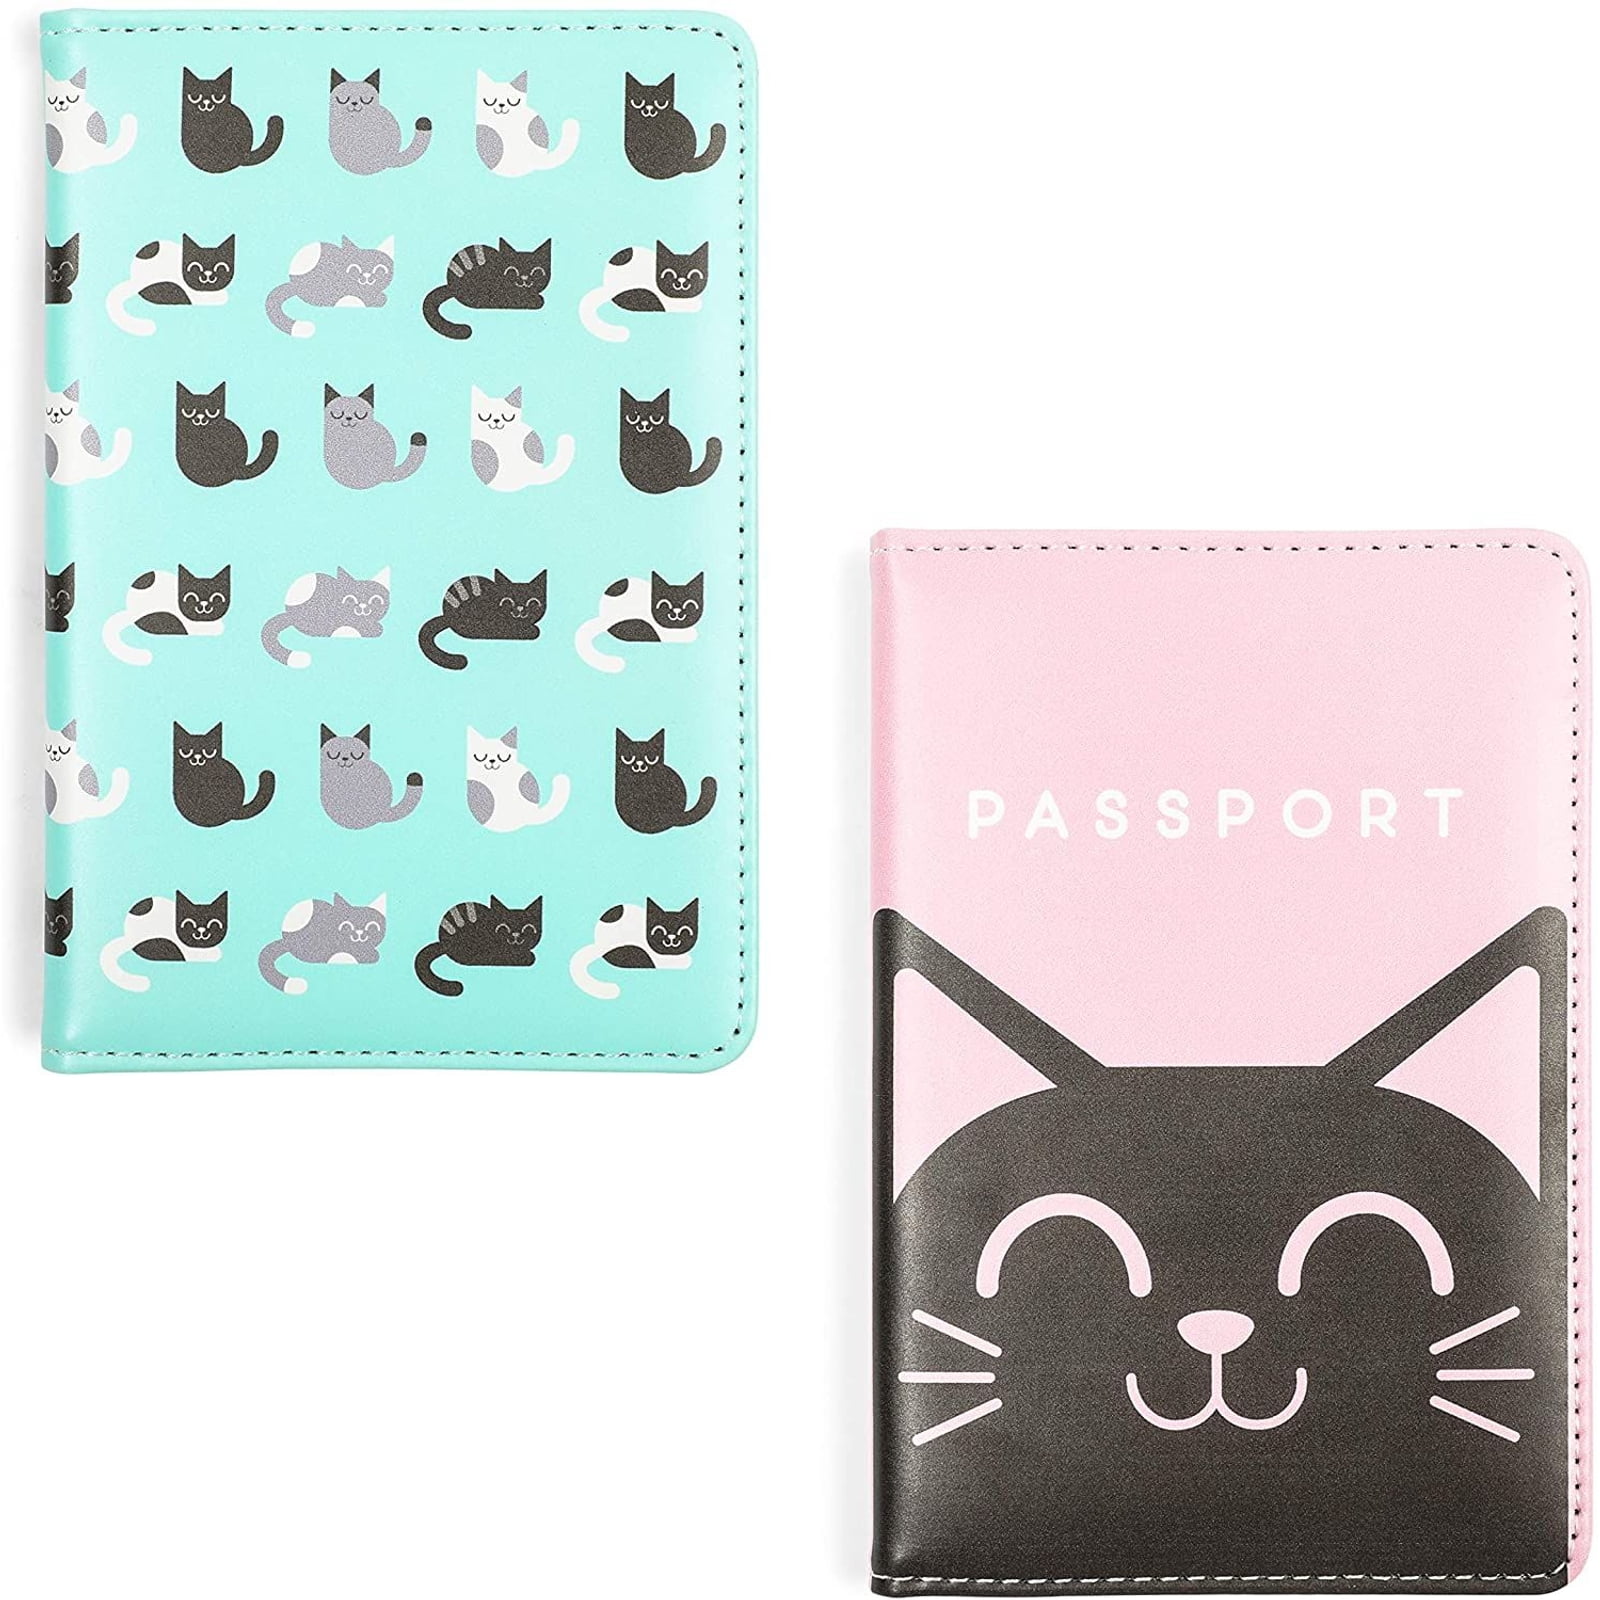 A Fuuny Dog Play The Piano Blocking Print Passport Holder Cover Case Travel Luggage Passport Wallet Card Holder Made With Leather For Men Women Kids Family 